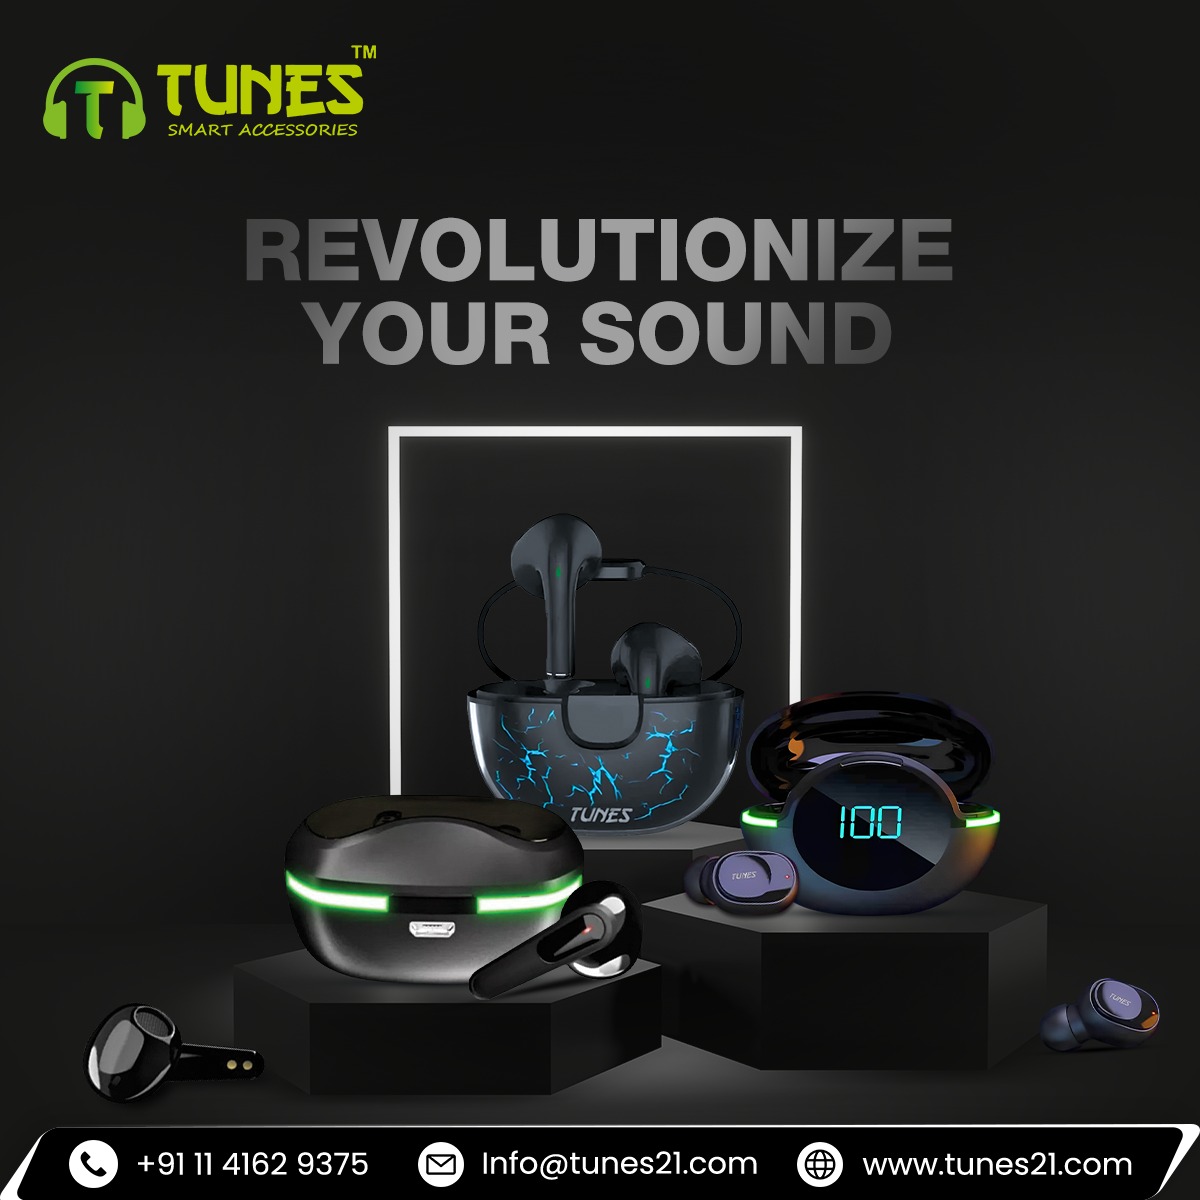 Turn up the excitement and let the music fuel your passion!🎵🔋

For information and orders please contact us✔️
 tunes21.com

#tunes #tunestolife #music #musically #accessories #headphones #headphonemusic  #gadgetshop #gadgetlife #charger  #NeckbandEarphones